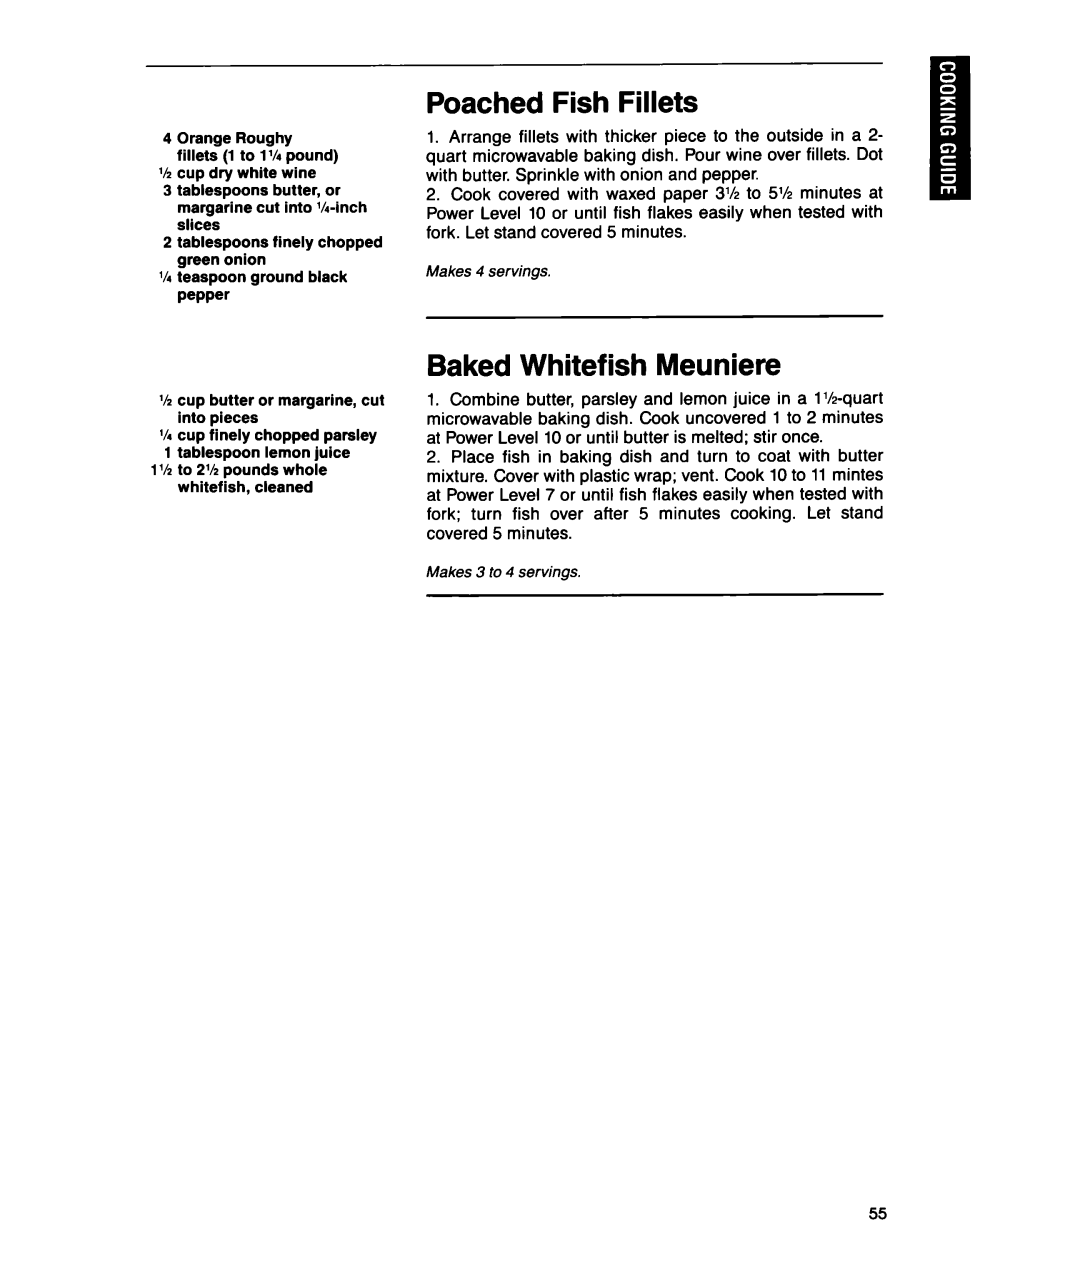 Whirlpool MTZ080XY user manual Poached Fish Fillets, Baked Whitefish Meuniere 